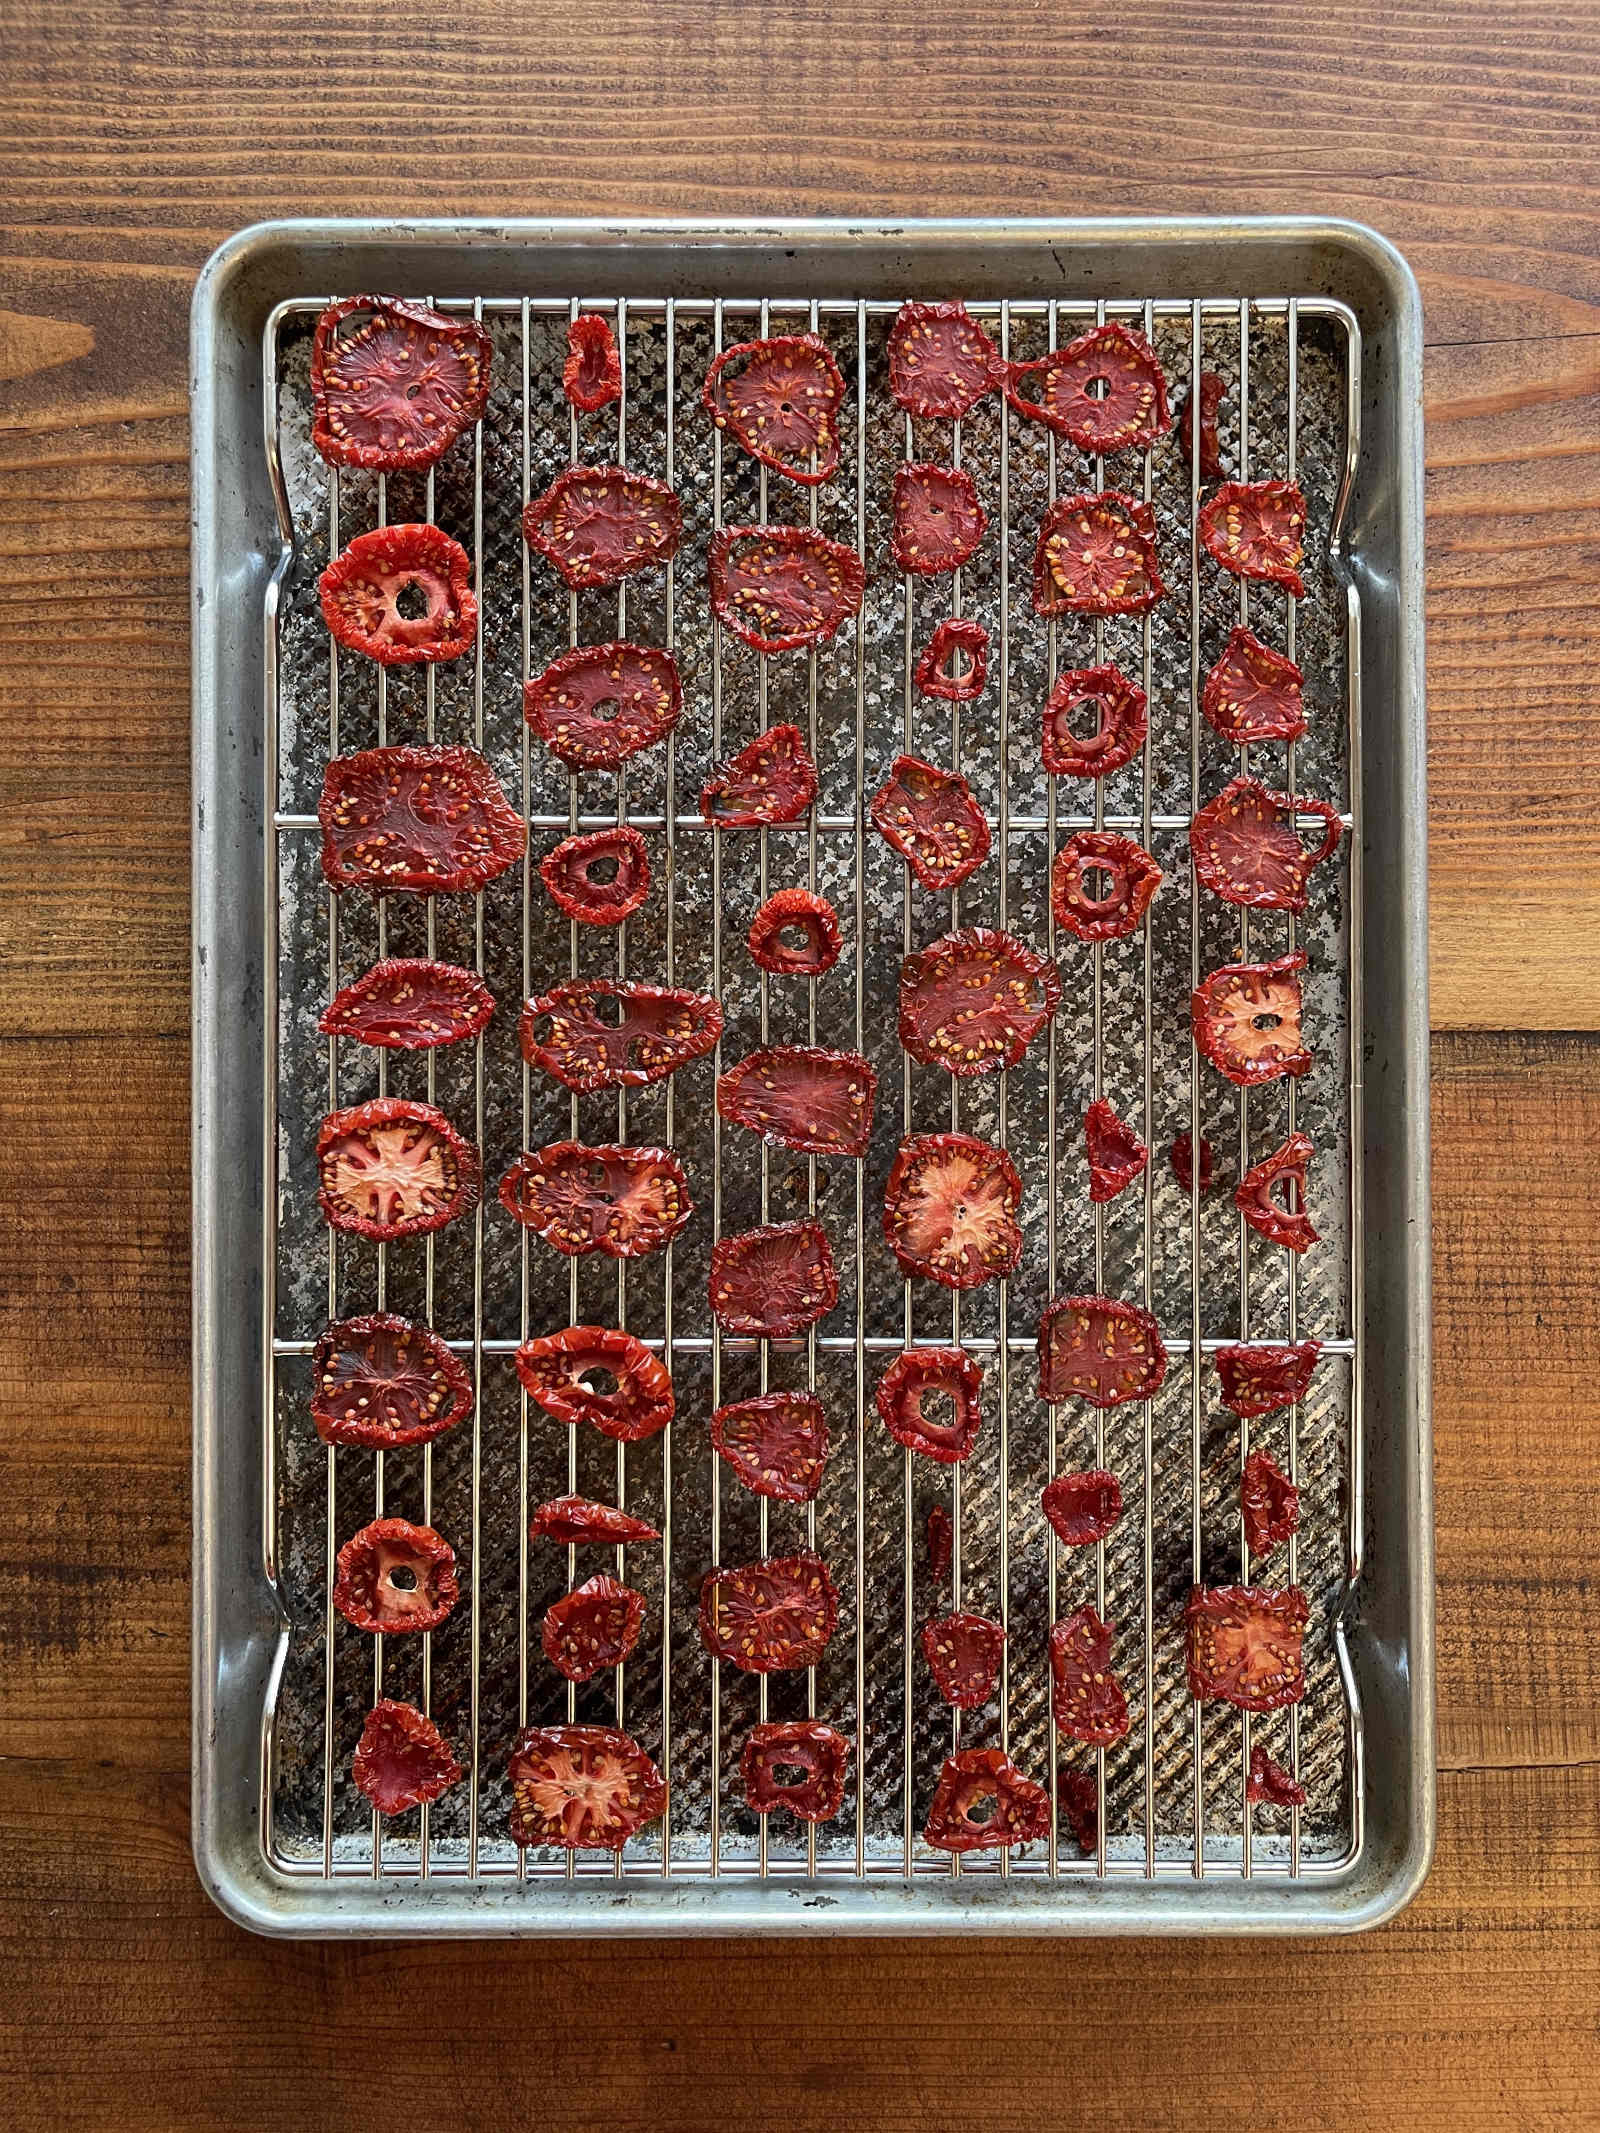 Dehydrated tomato slices arranged on a silver wire cooling rack set inside a silver baking sheet before dehydrating. The baking sheet sits on a dark wood background.